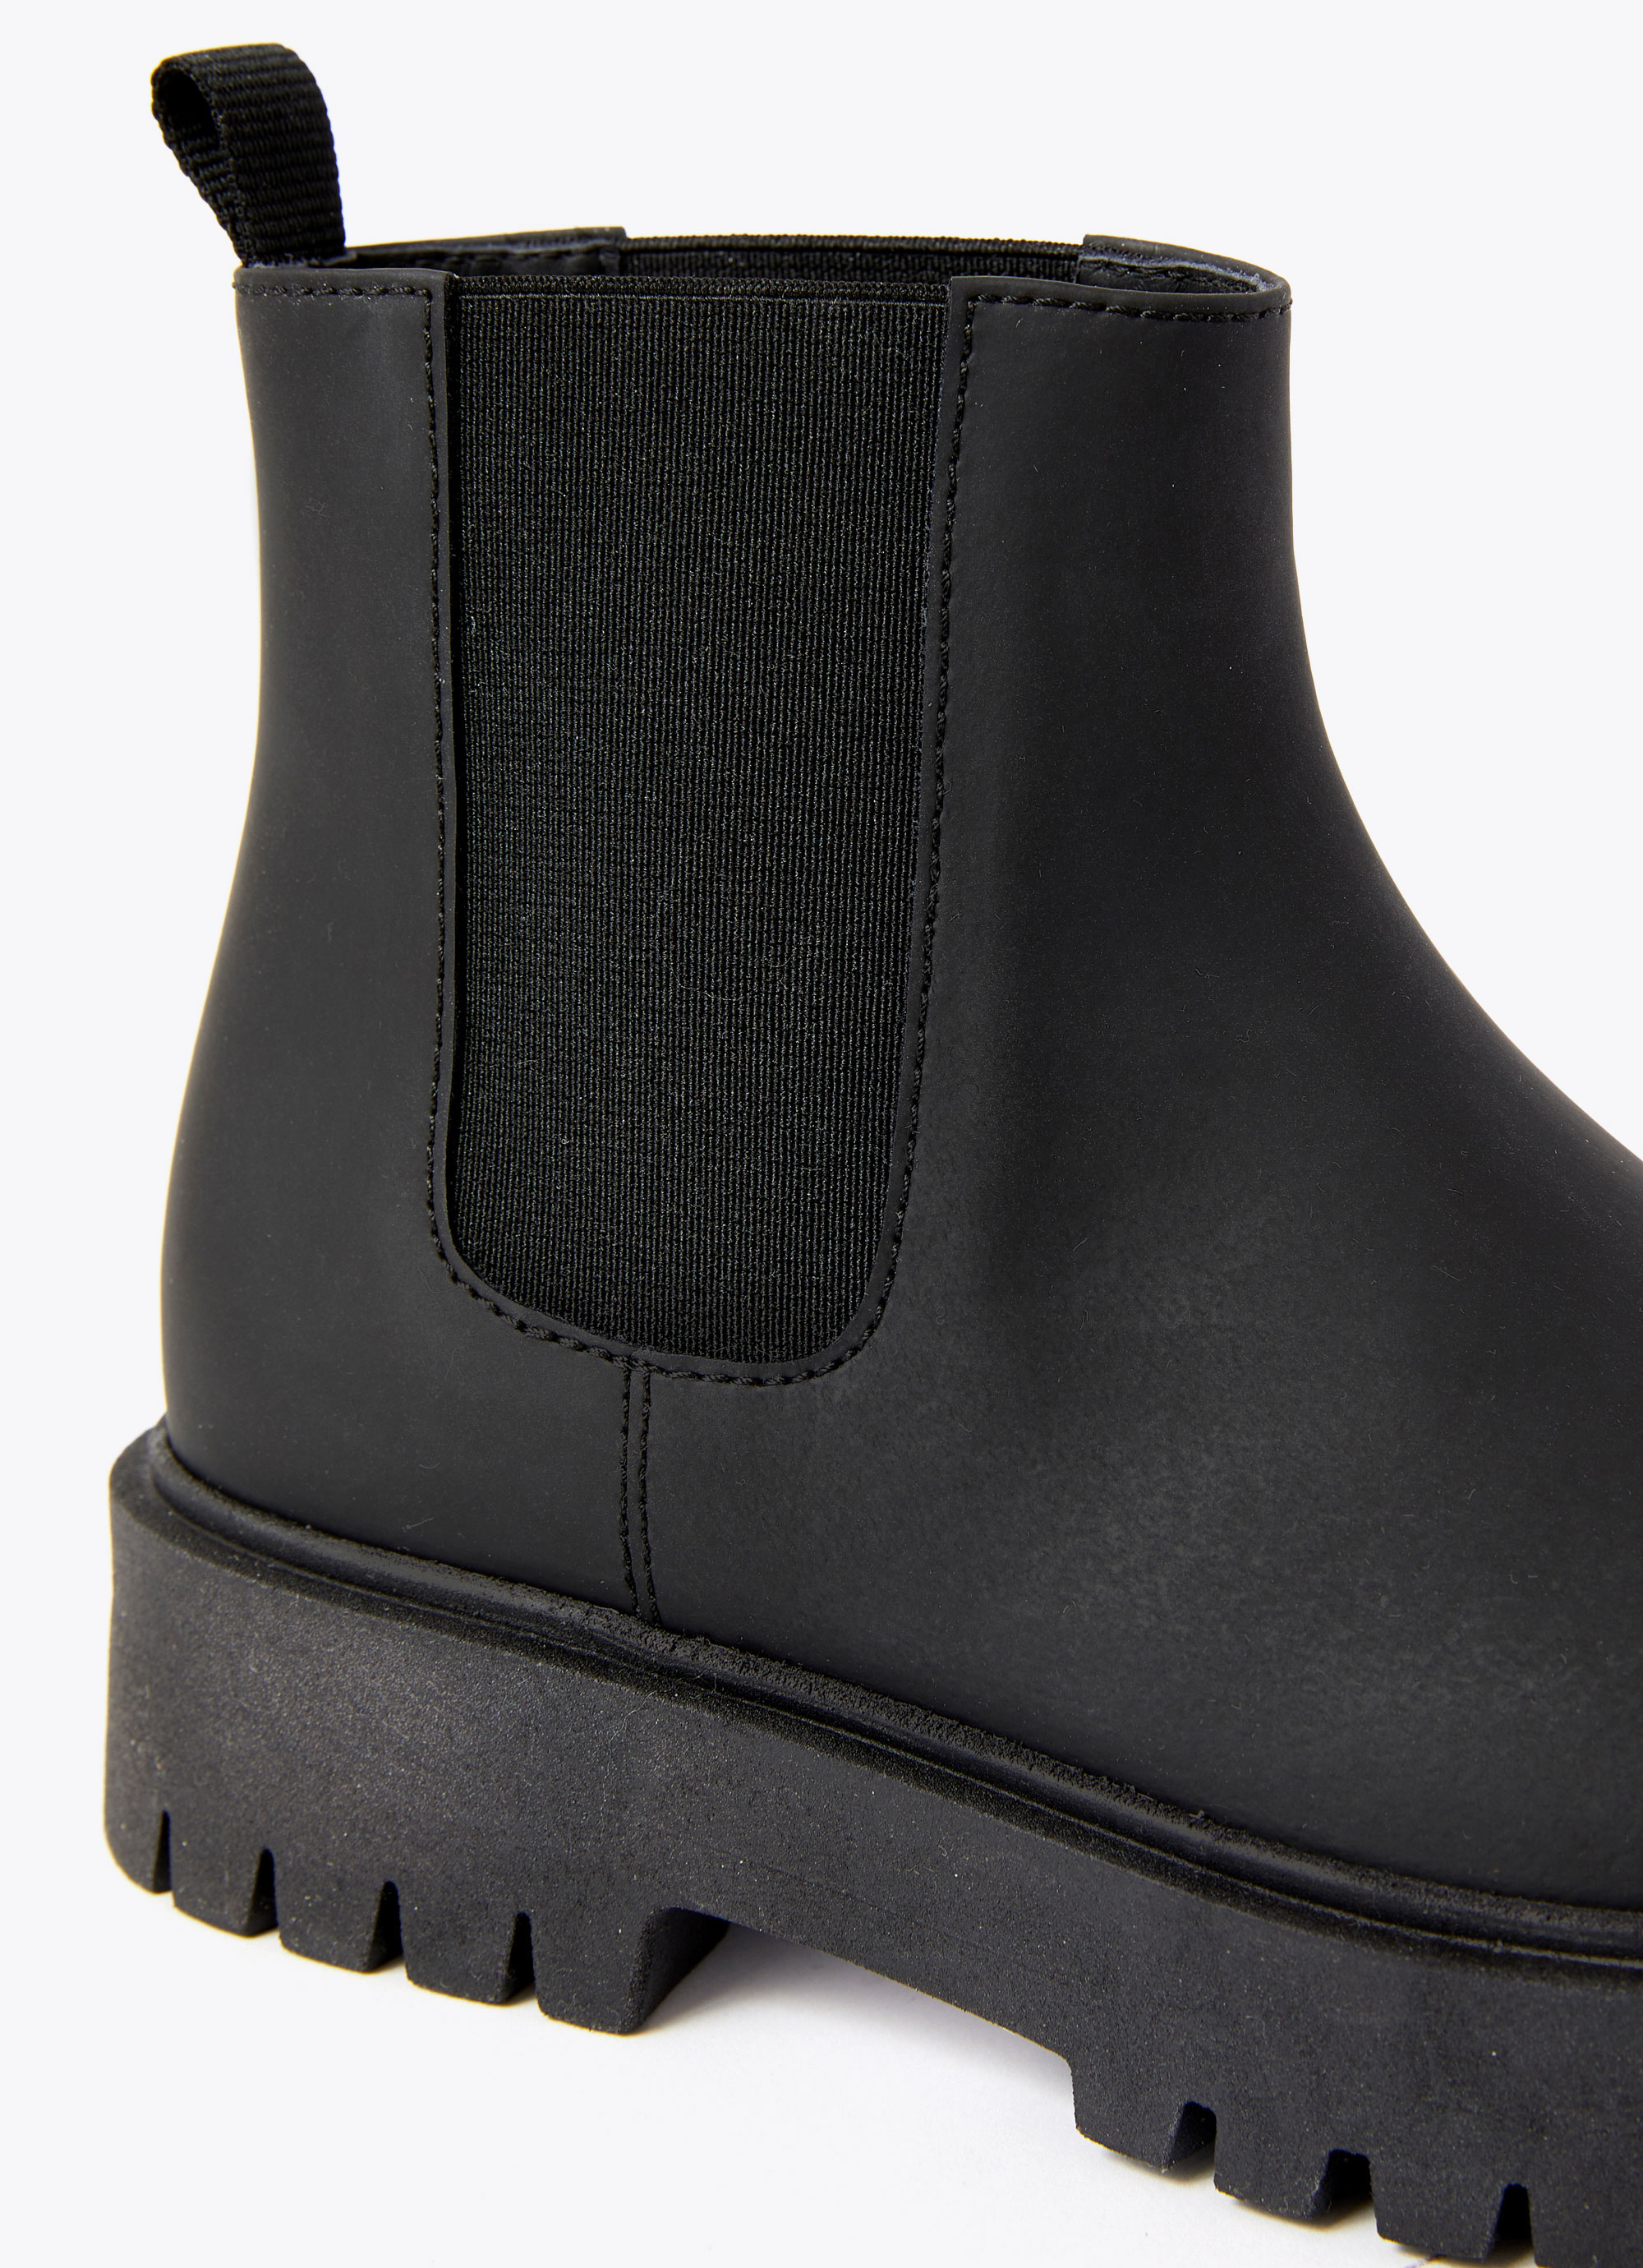 Black Chelsea boots with chunky sole - Black | Il Gufo